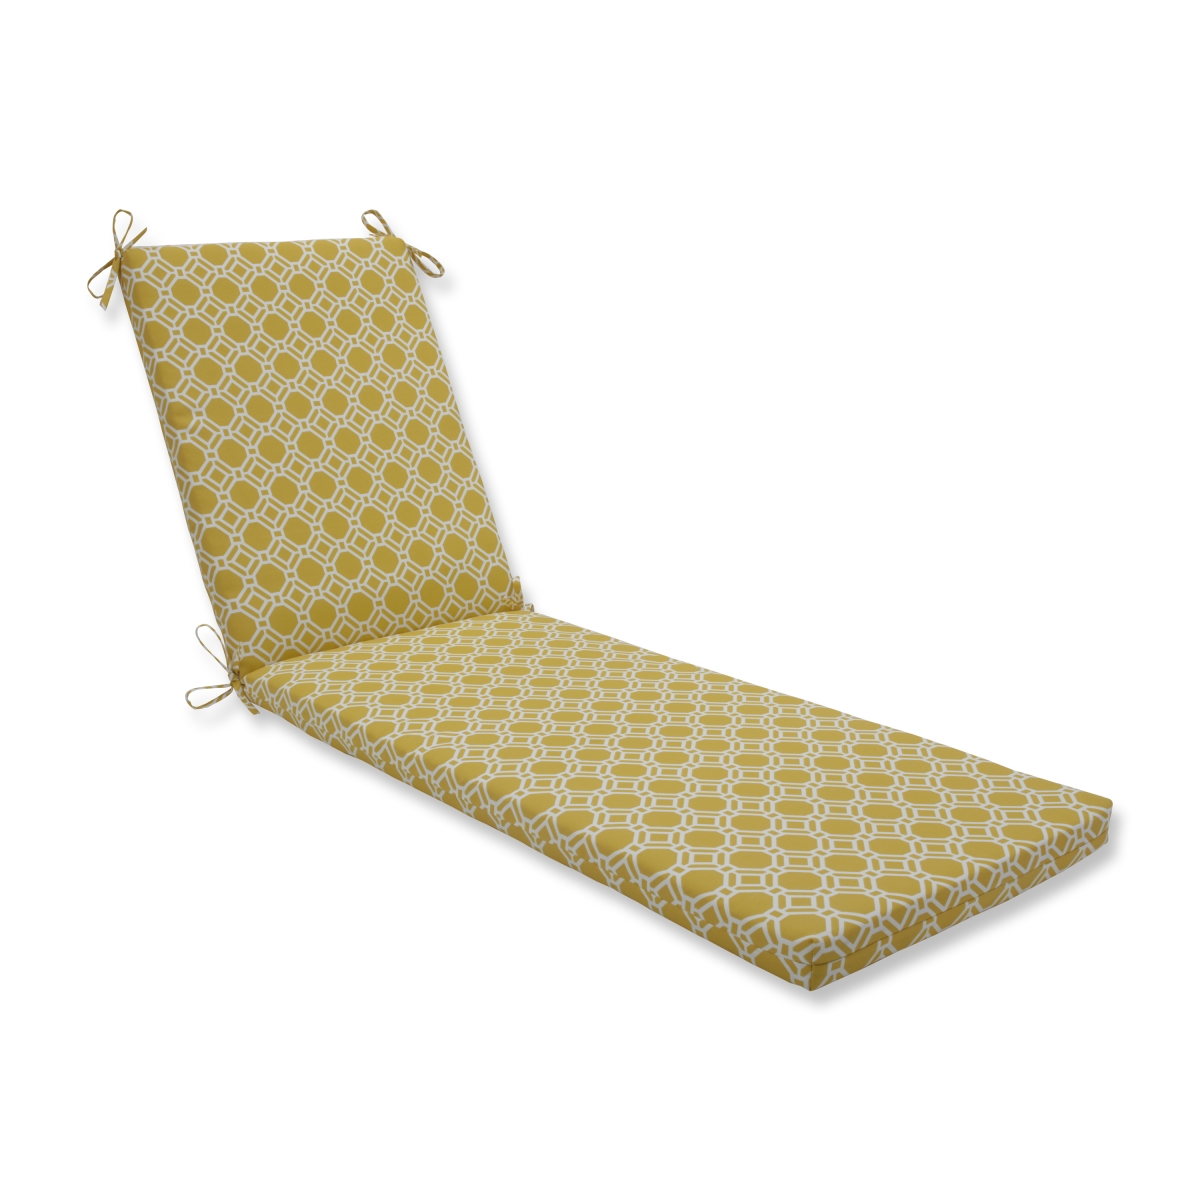 80 X 23 X 3 In. Outdoor & Indoor Rossmere Sunshine Chaise Lounge Cushion, Yellow